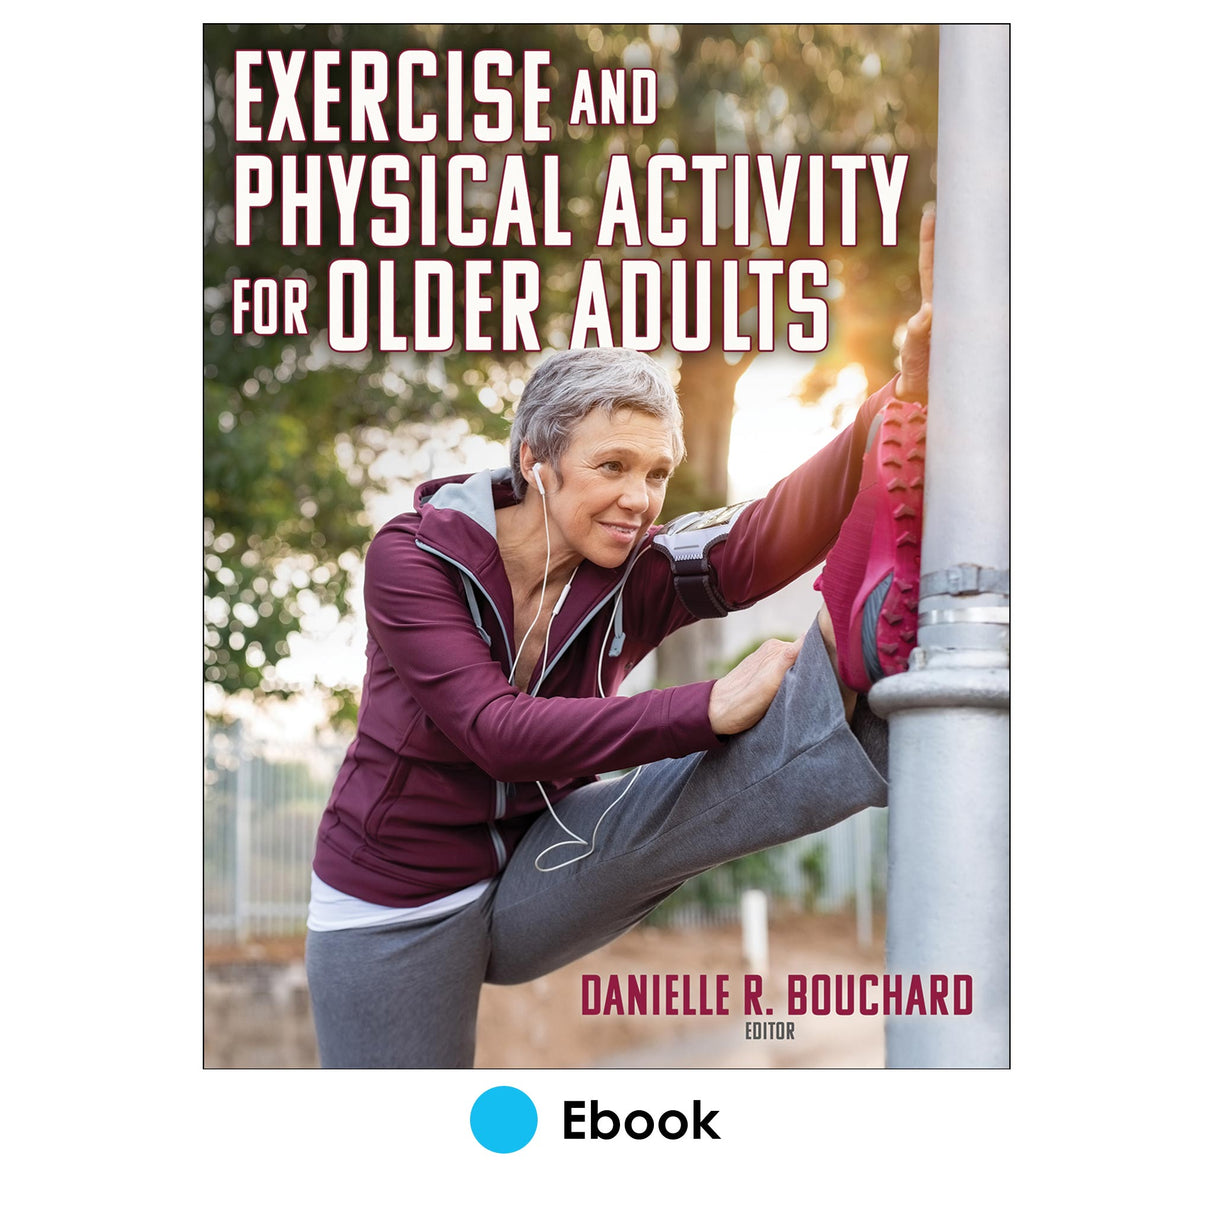 Exercise and Physical Activity for Older Adults epub